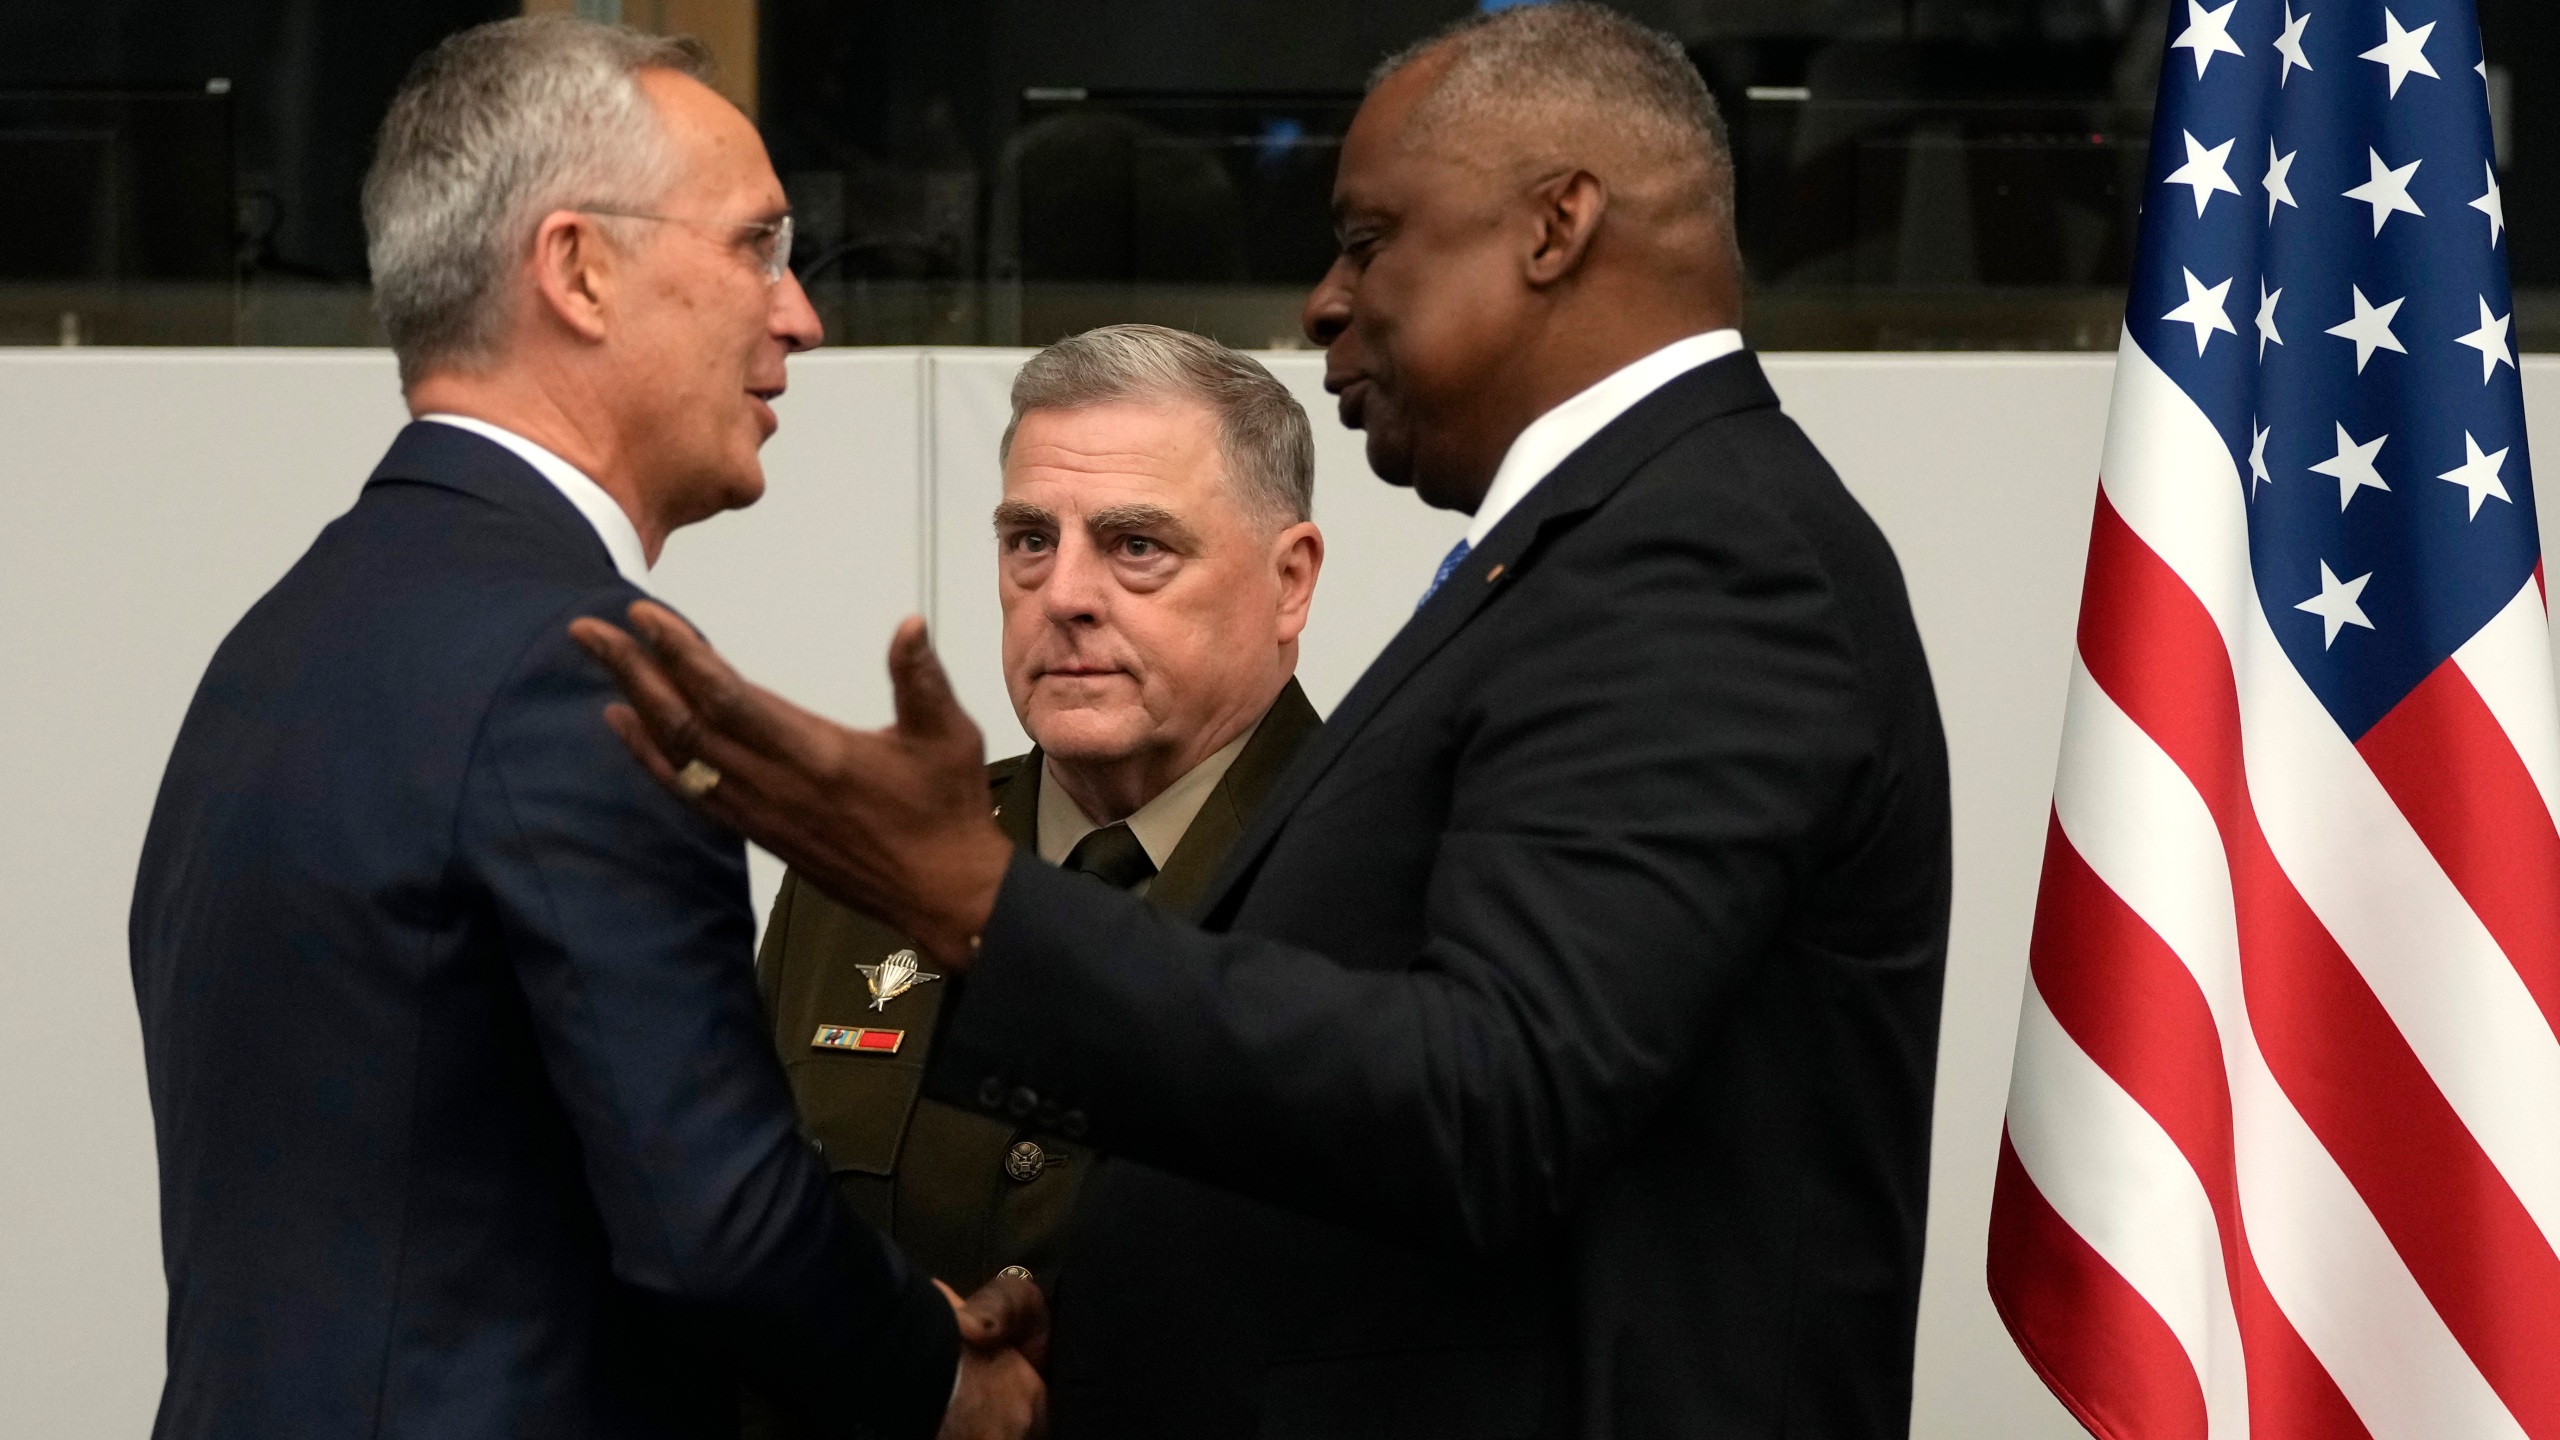 United States Secretary of Defense Lloyd Austin, right, greets NATO Secretary General Jens Stoltenberg, left, during a meeting of the Ukraine Defense Contact Group at NATO headquarters in Brussels, Thursday, June 15, 2023. NATO defense ministers are holding two days of meetings to discuss their support for Ukraine and ways to boost the defenses of eastern flank allies near Russia. A meeting of the Ukraine Contact Group is being held to drum up more military aid for the war-torn country. (AP Photo/Virginia Mayo)